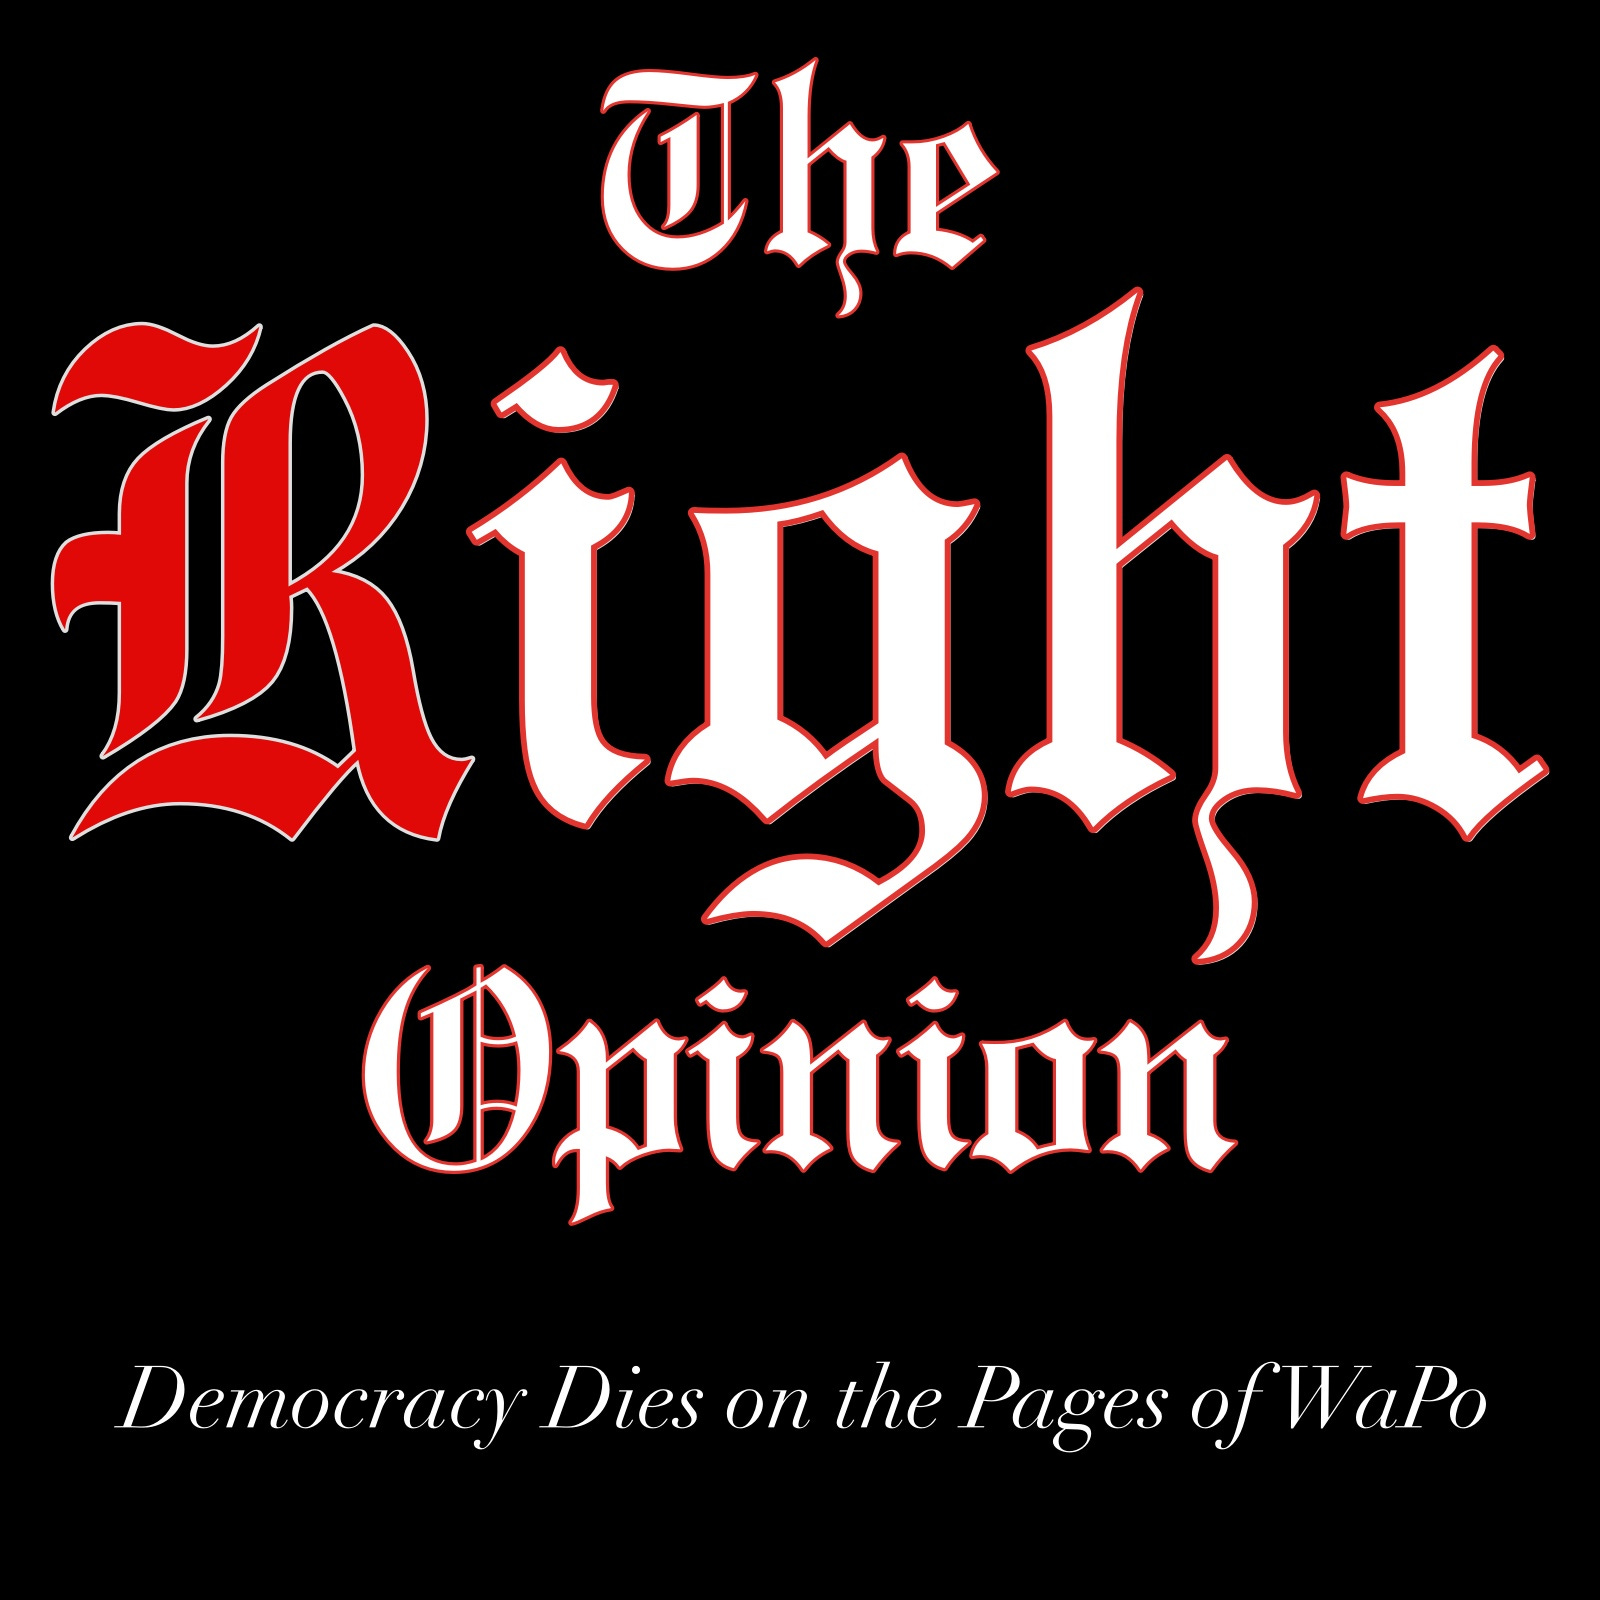 The Right Opinion: Debunking Modern Gender Theory and SCOTUS